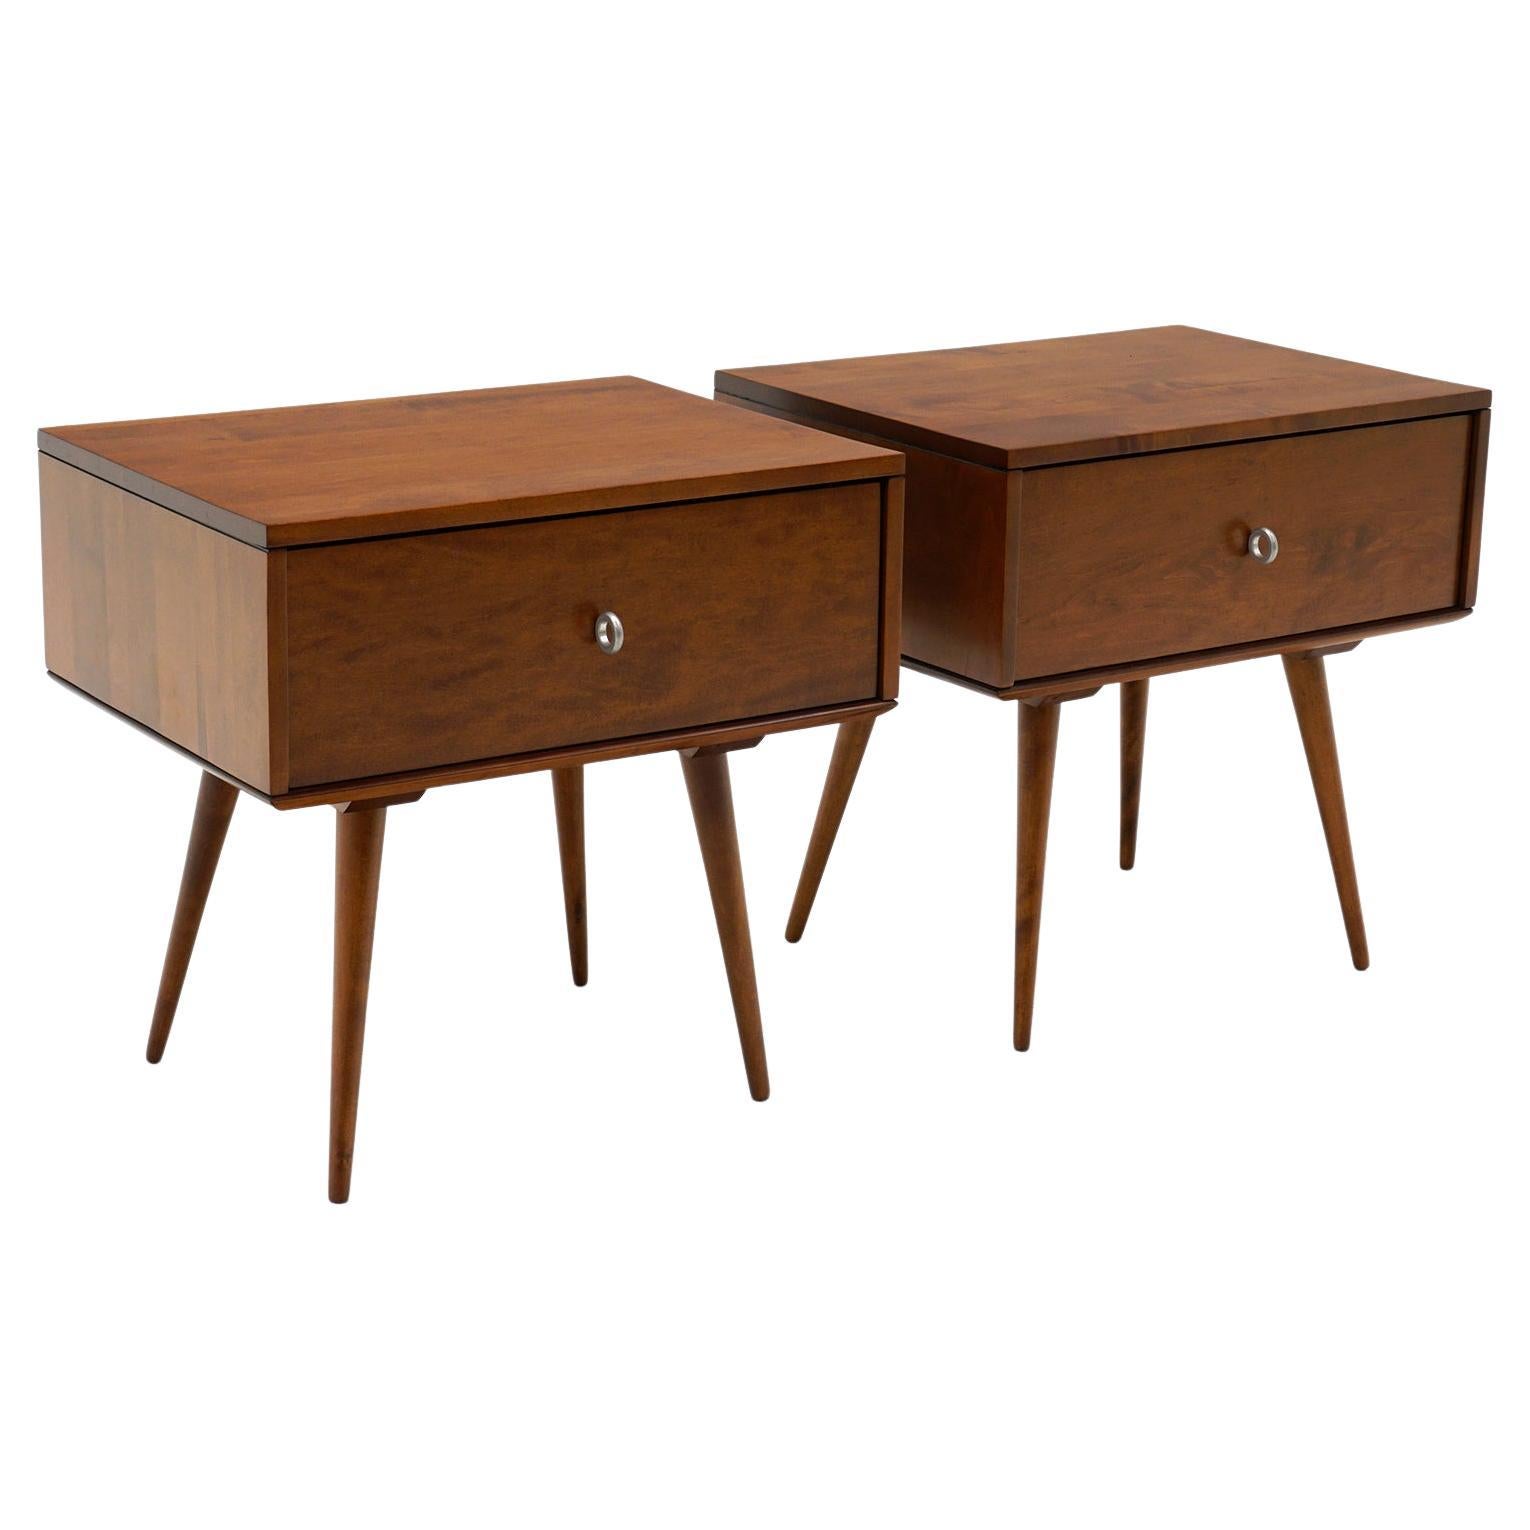 Pair of Paul McCobb Night stands. Planner Group for Winchendon. 1950's. Signed.